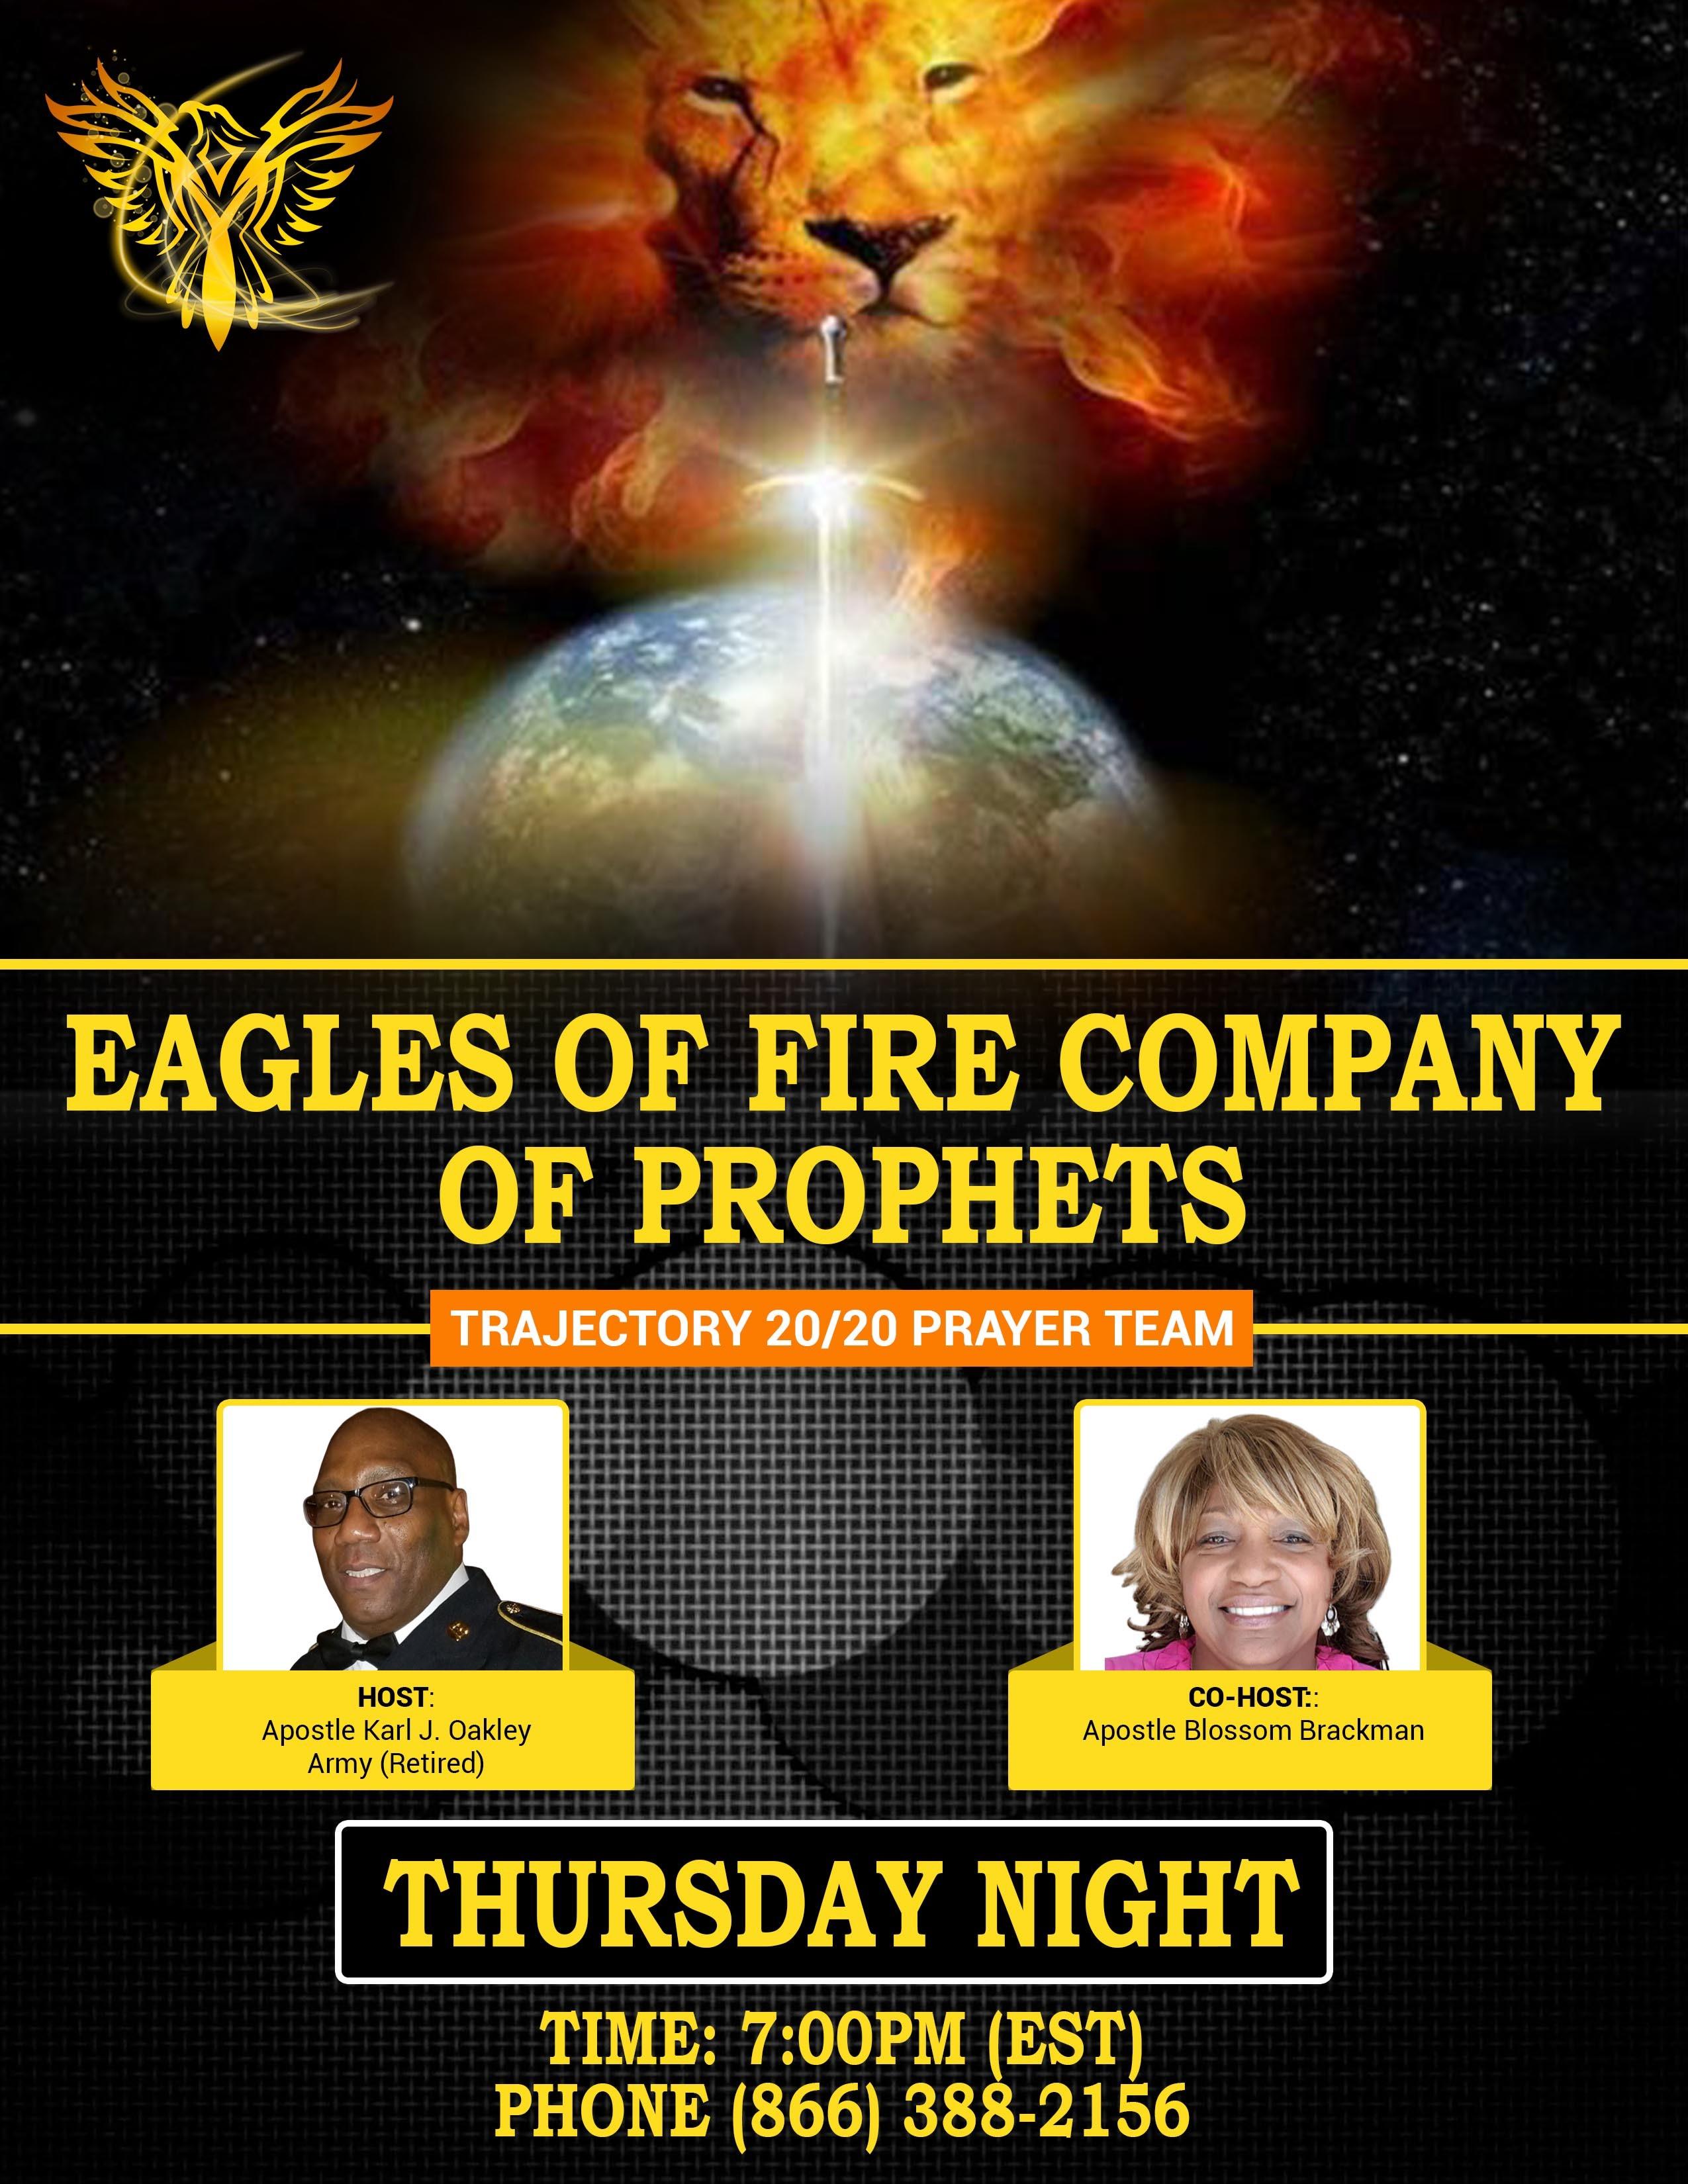 Eagles of Fire Company of Prophets - Trajectory 20/20 Prayer Line